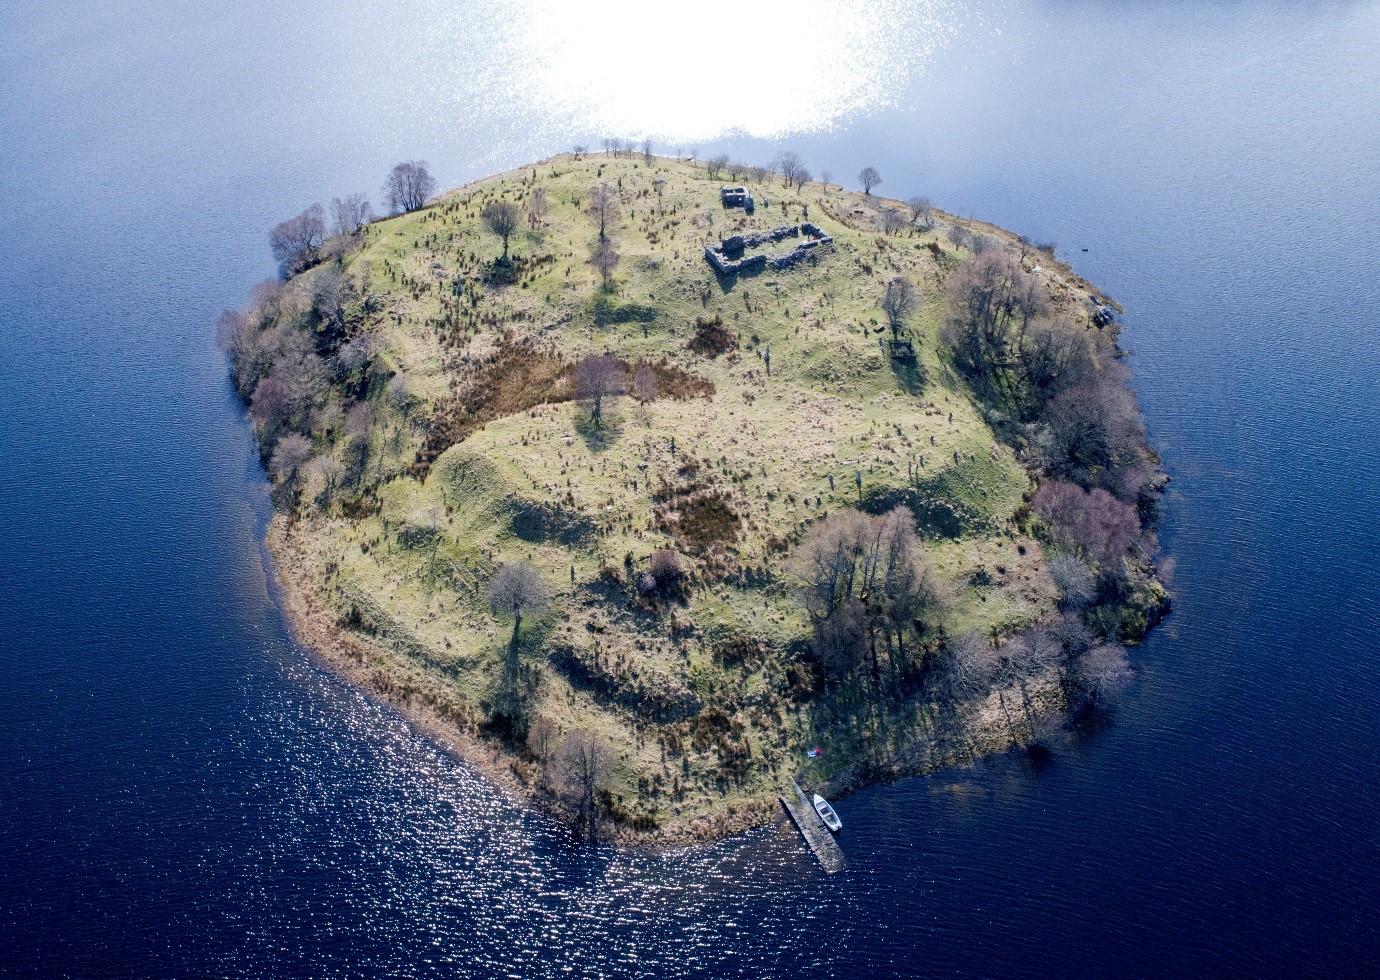 aerial view of a round island surrounded by water with a ruined building visible at one side